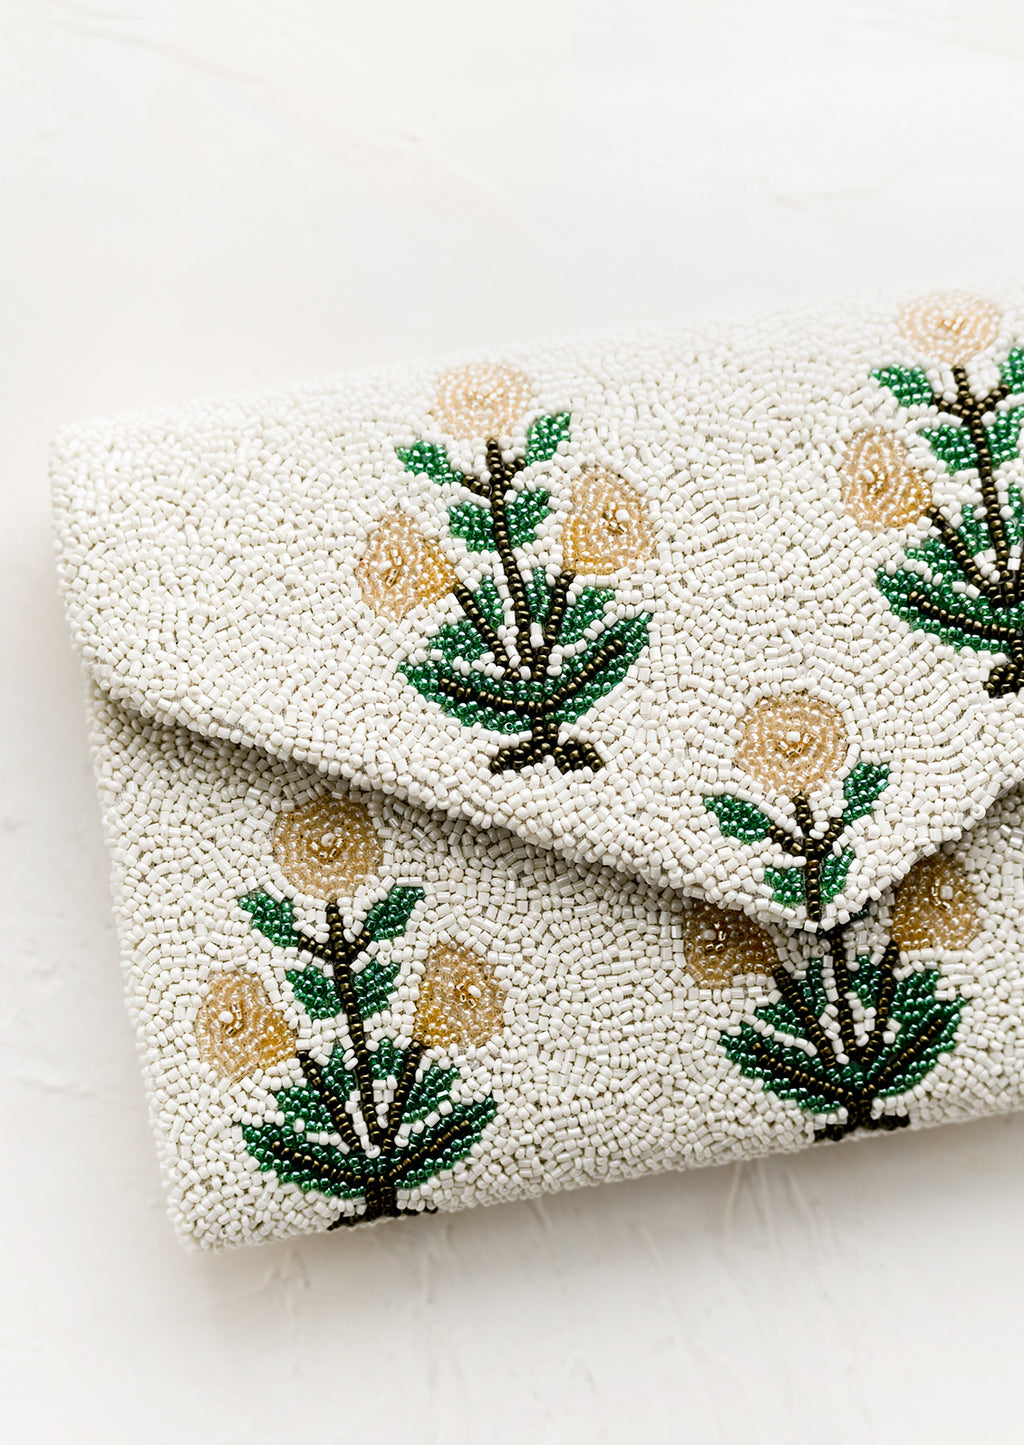 2: A beaded clutch in floral pattern and envelope silhouette.